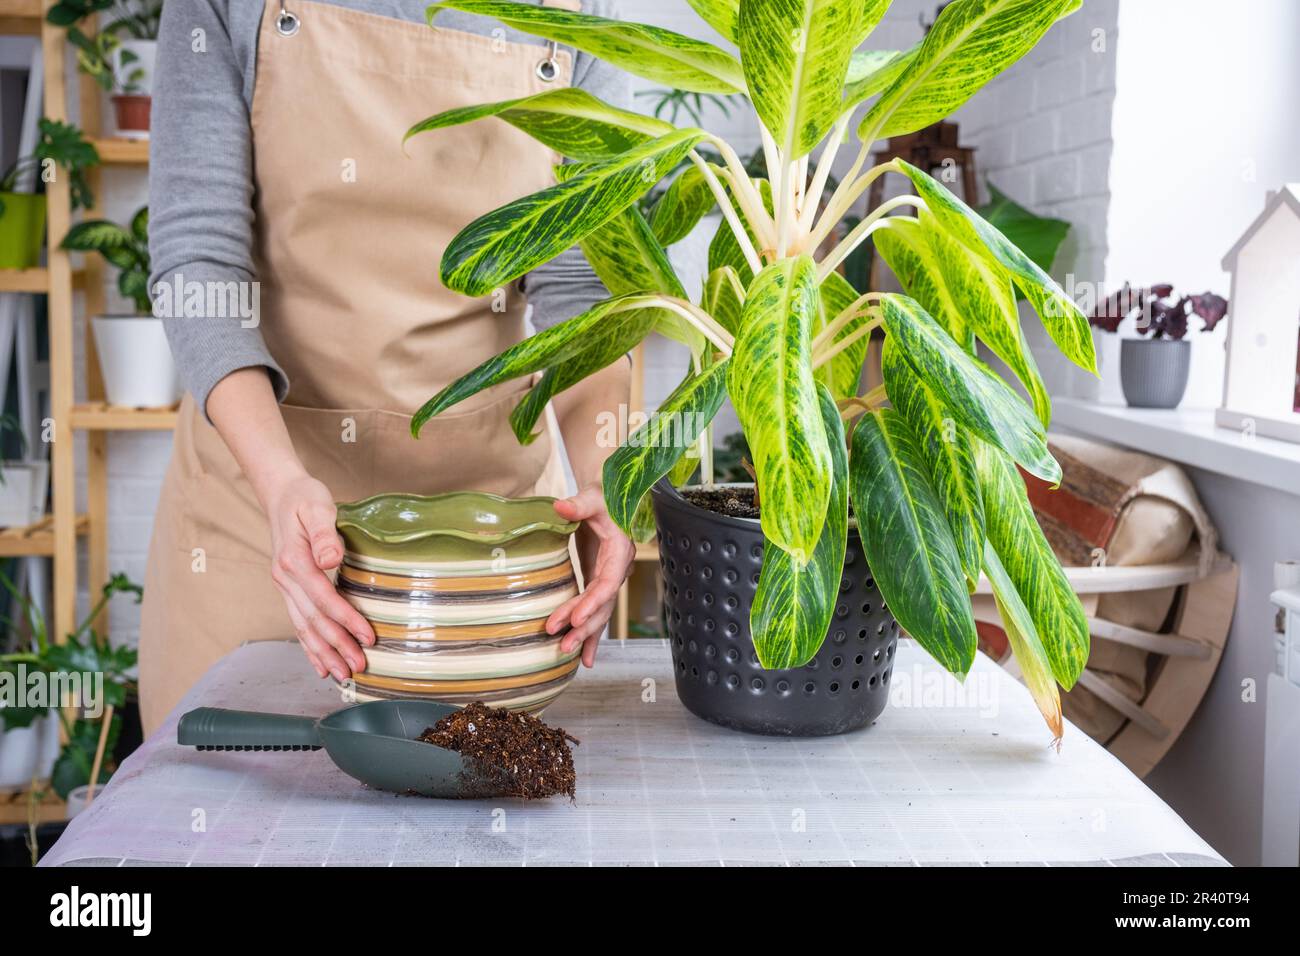 Repotting a home plant aglaonema into new pot in home interior. Woman in an apron Caring for a potted plant Stock Photo